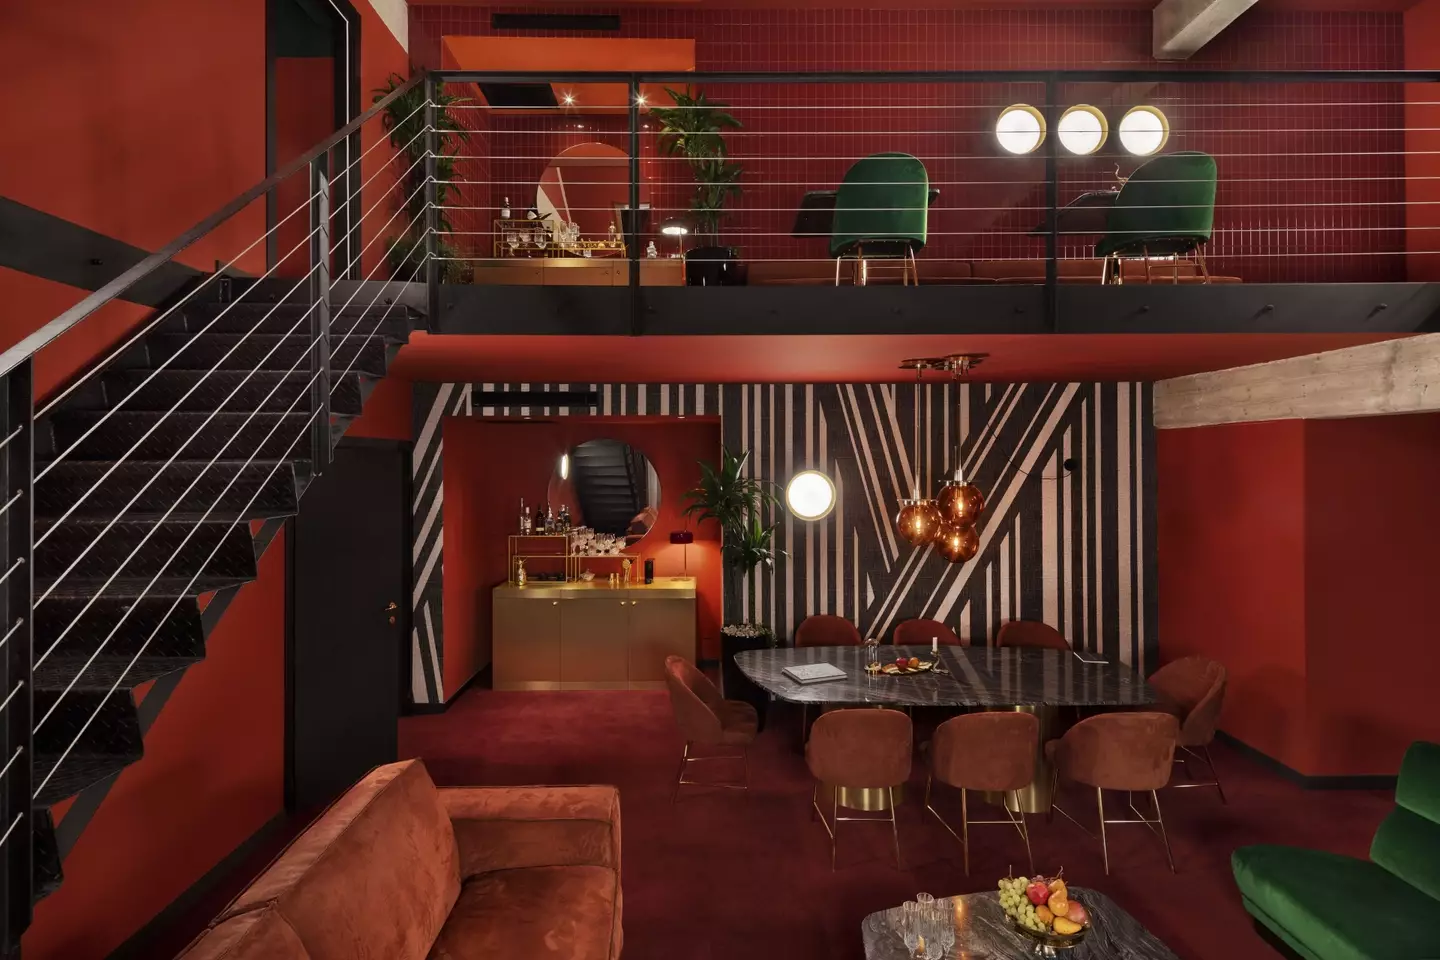 Looking for a groovy vibe? Check out the Stories hotel in Budapest, Hungary.